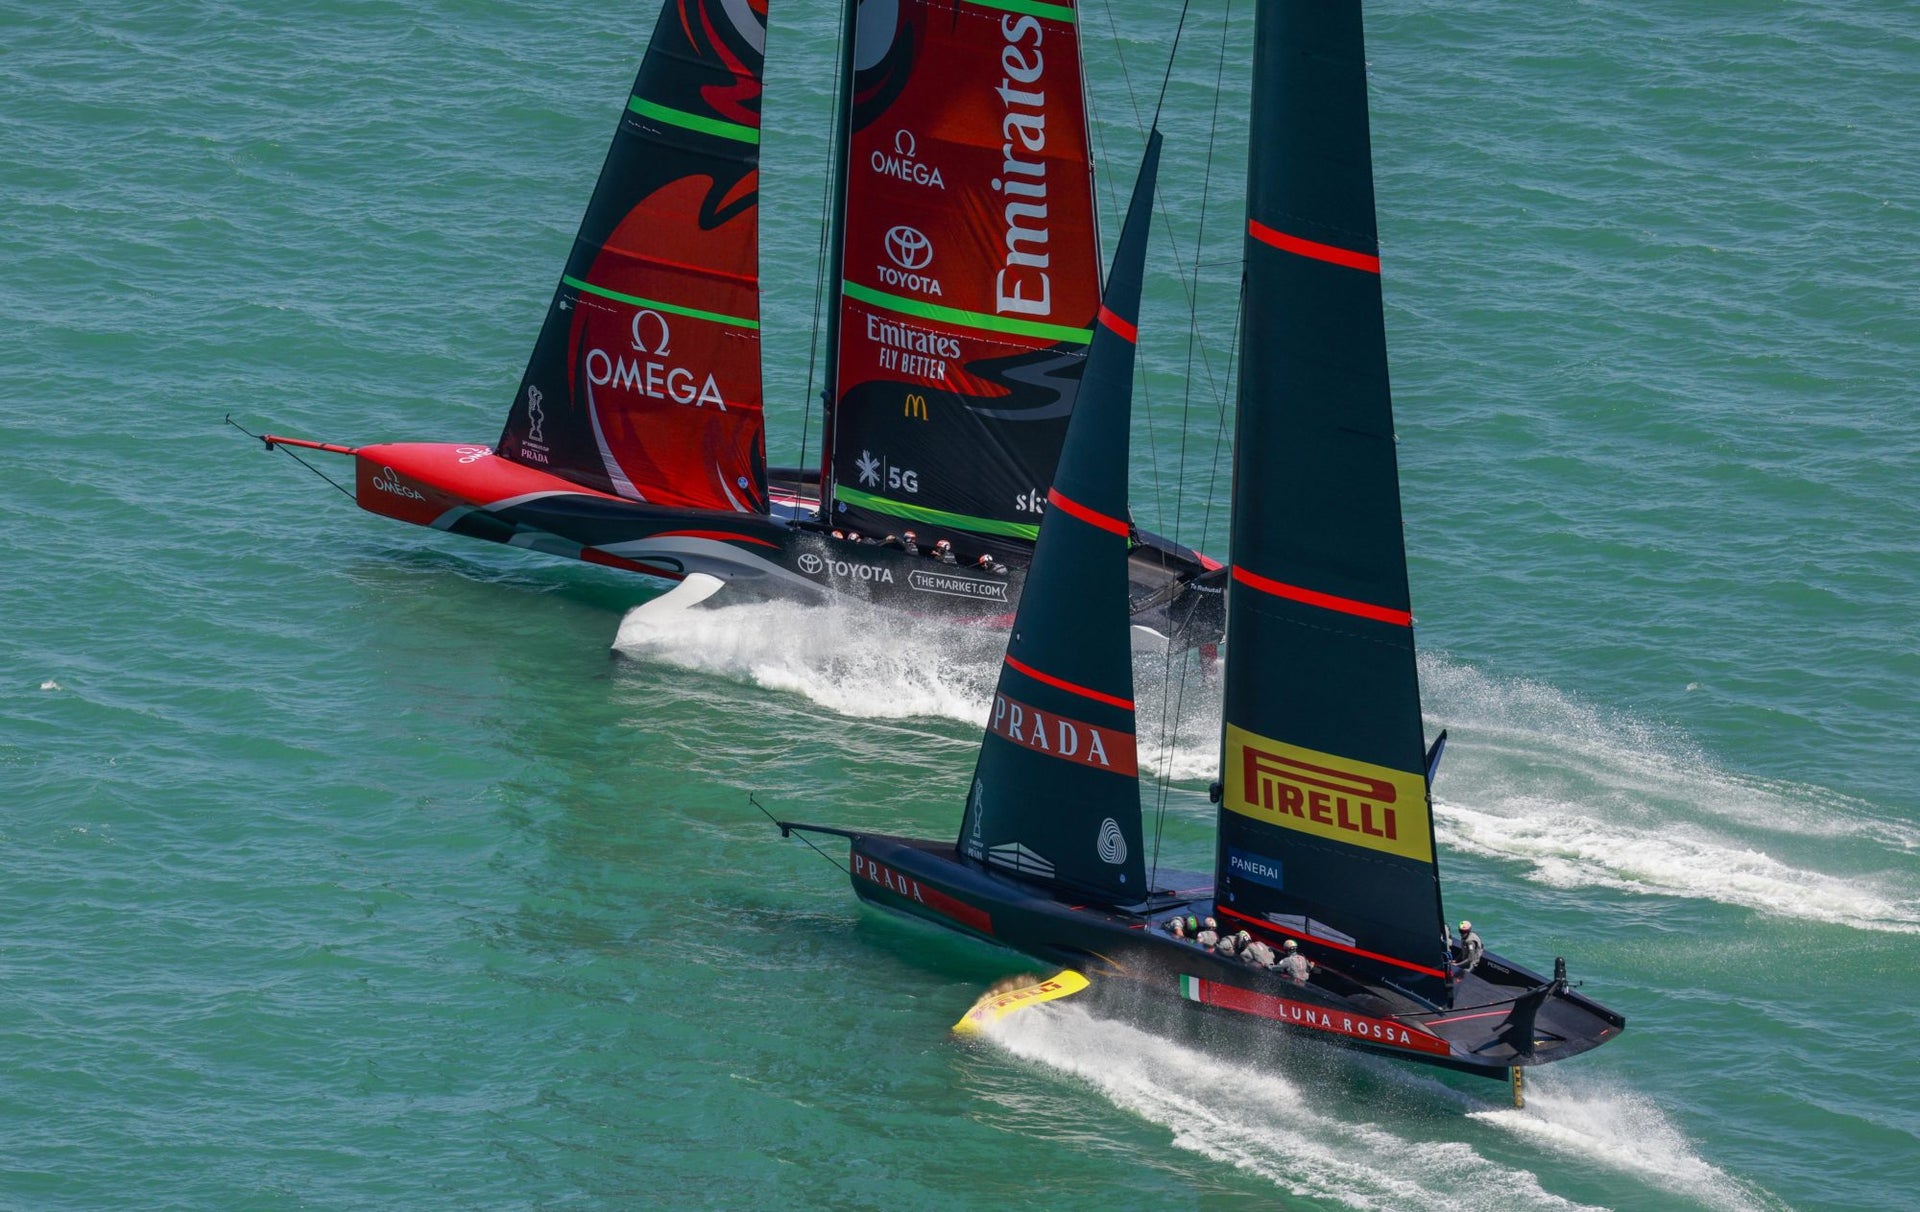 BEHIND THE SCENES: NORTH SAILS AT THE 36TH AMERICA’S CUP